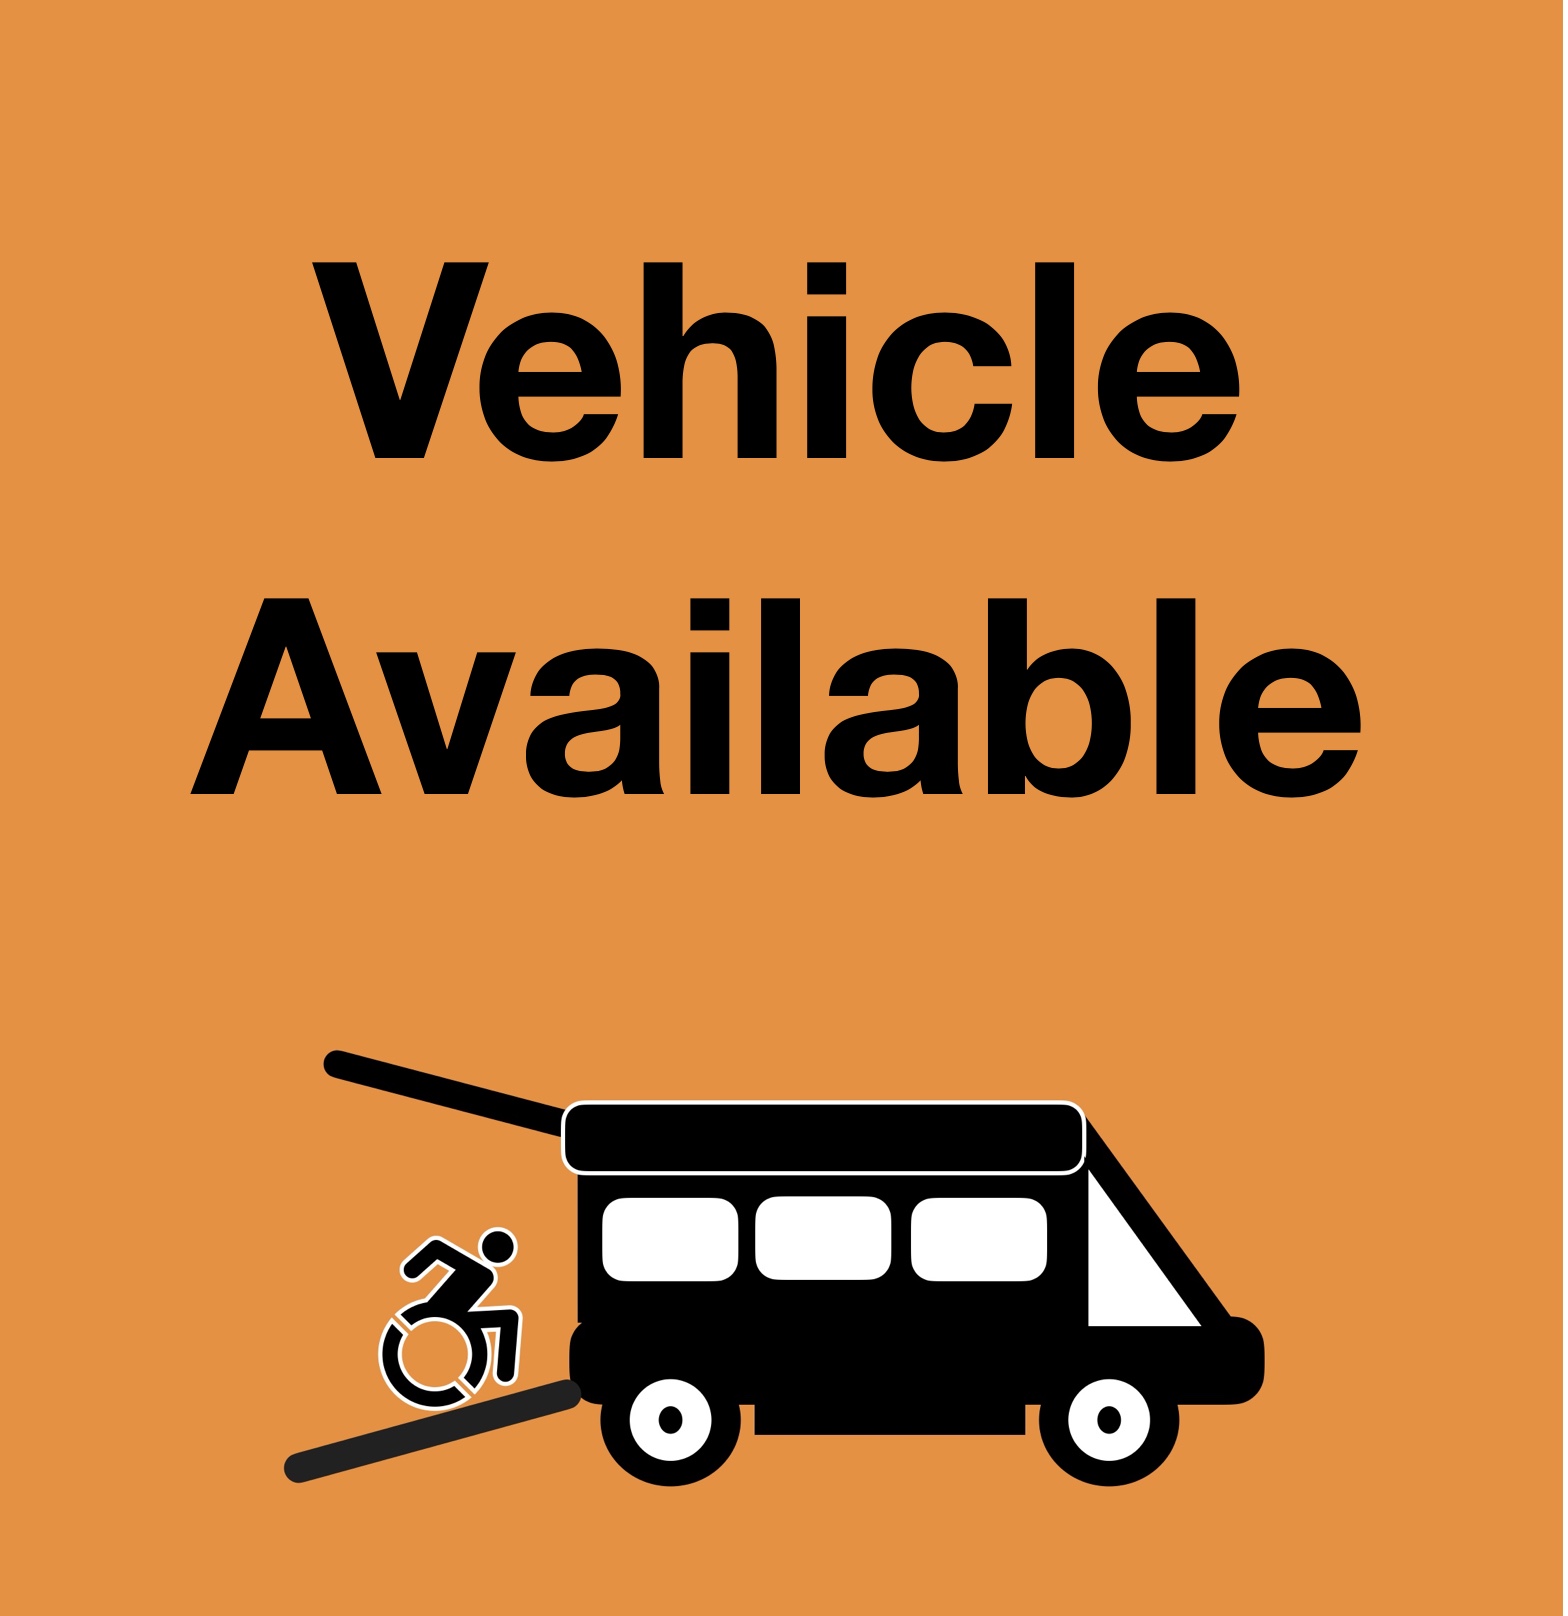 Accessible Vehicle Available